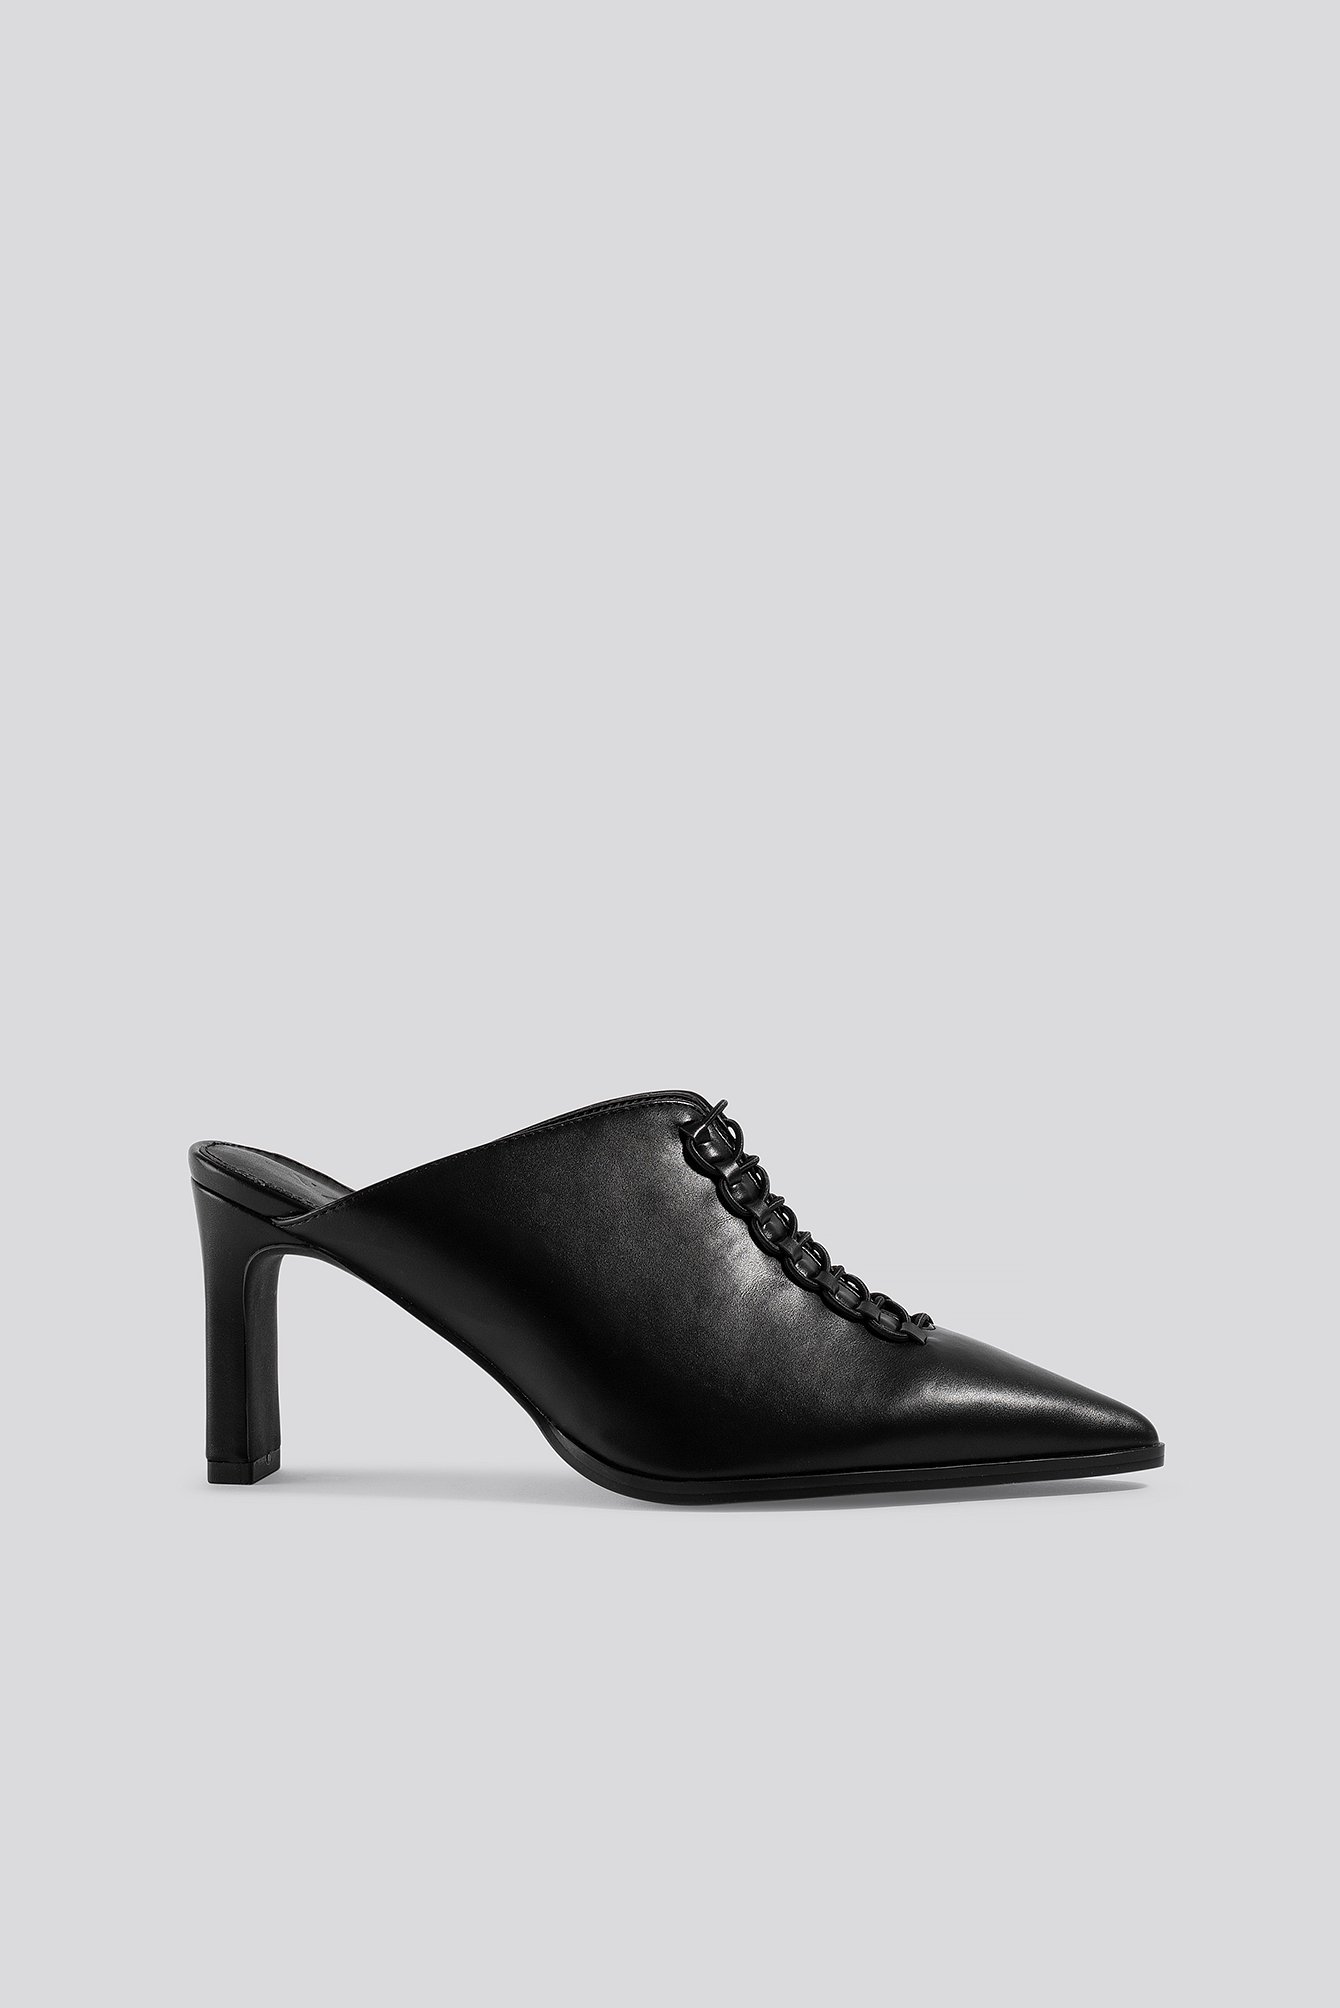 NA-KD Shoes Pointy Lace Up Mules - Black